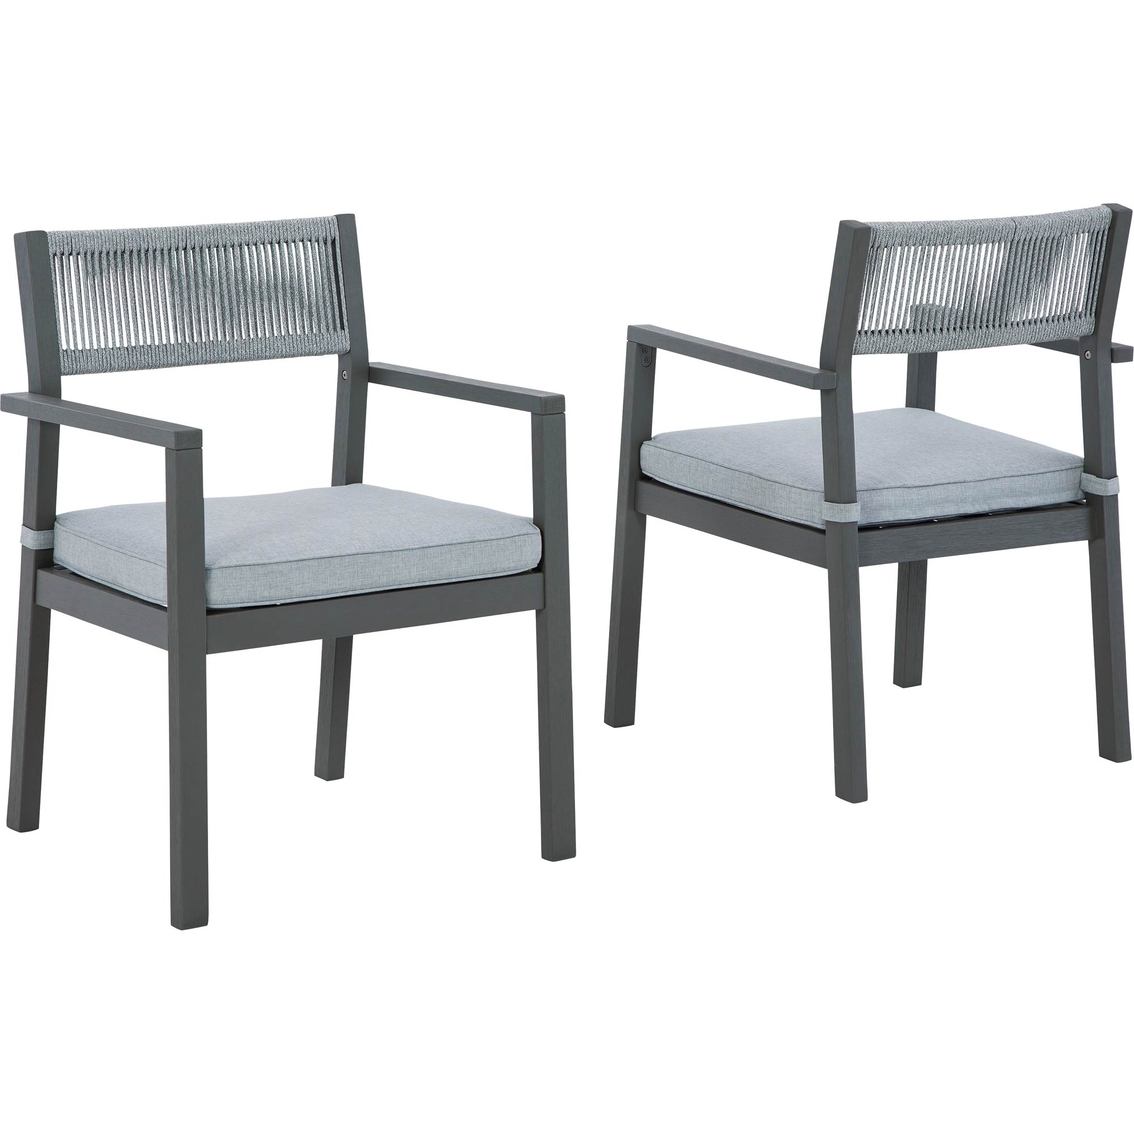 Signature Design by Ashley Eden Town Arm Chair with Cushion 2 pk. - Image 2 of 7